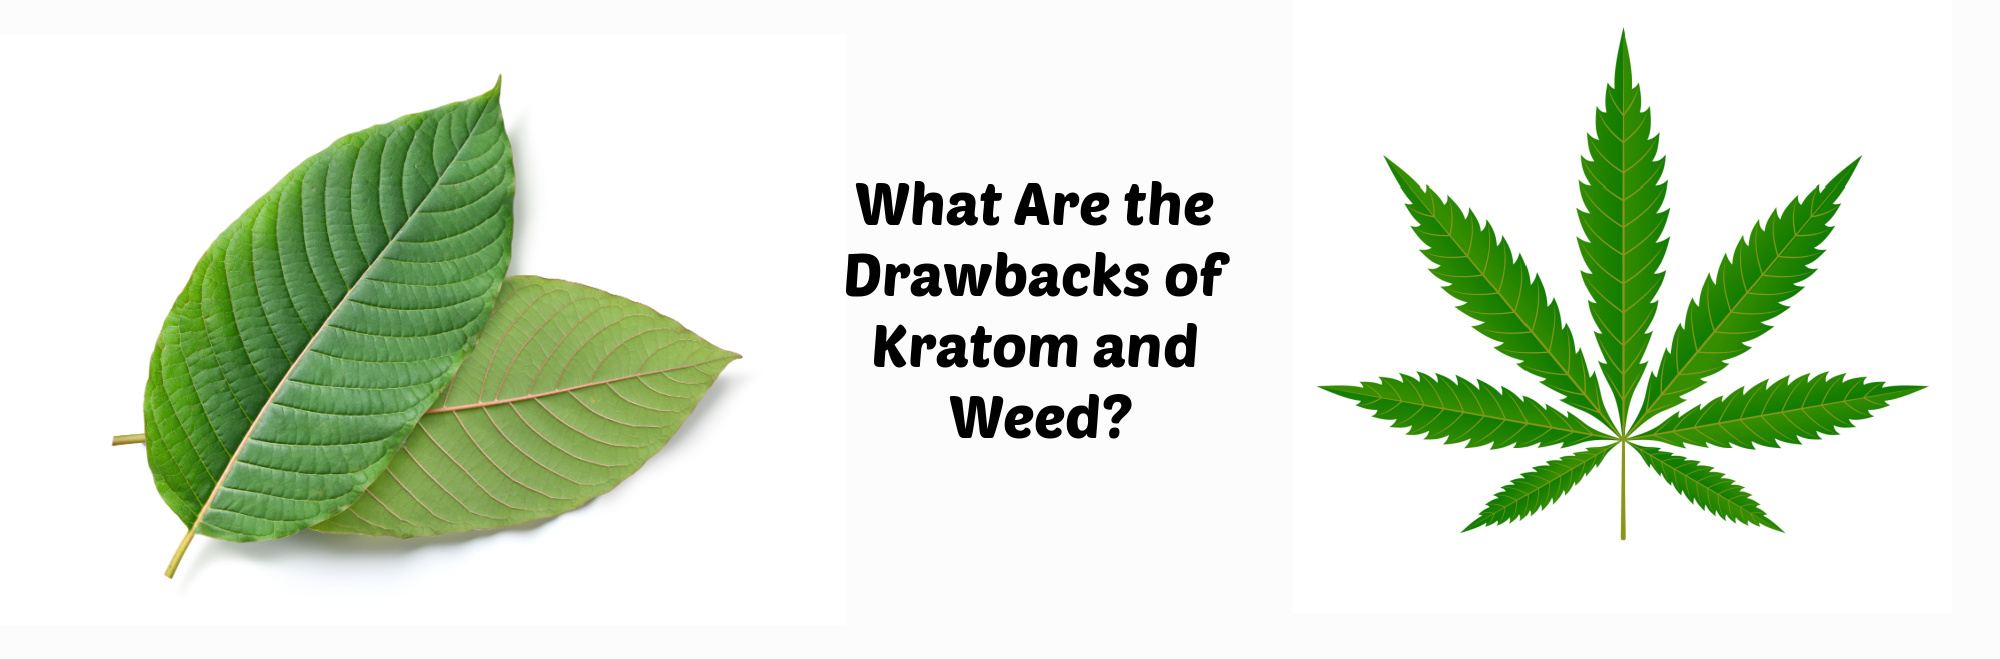 image of what are the drawbacks of kratom and weed